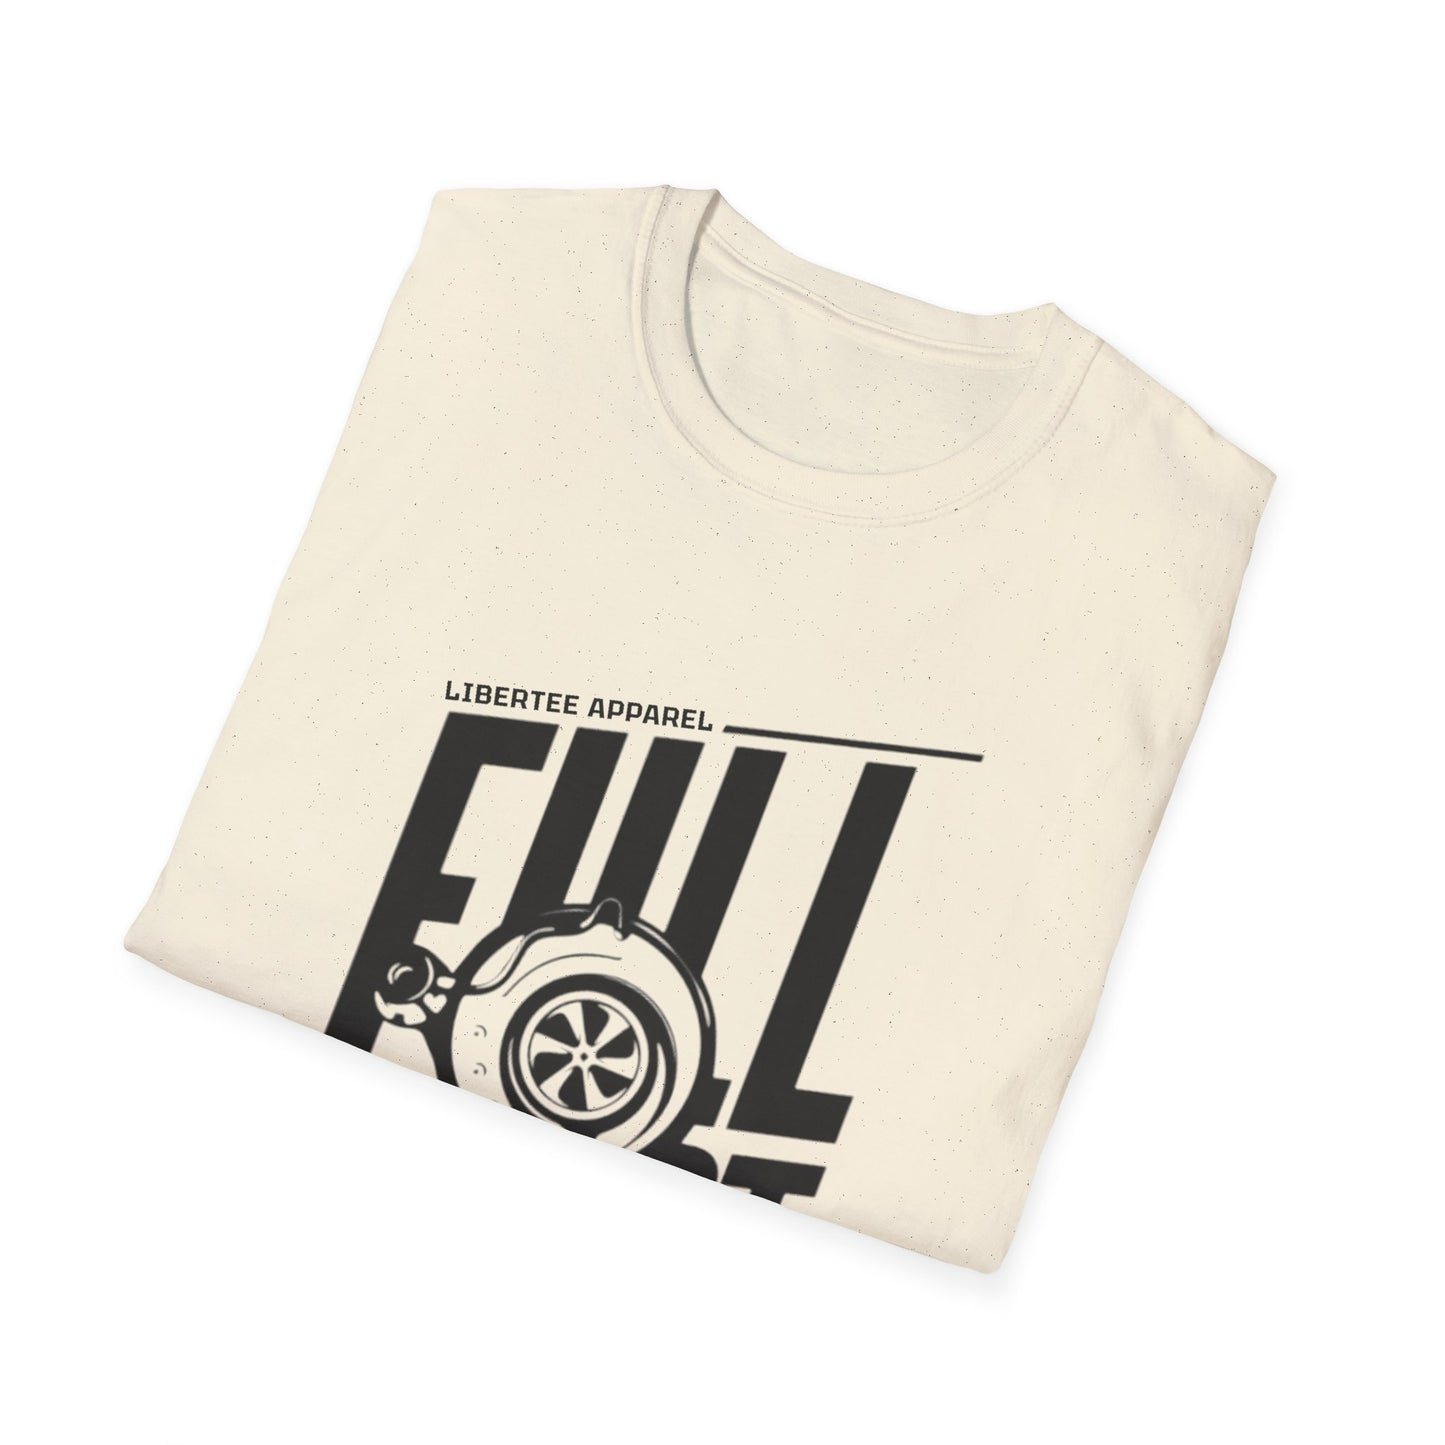 Full Boost Unisex Softstyle T-Shirt